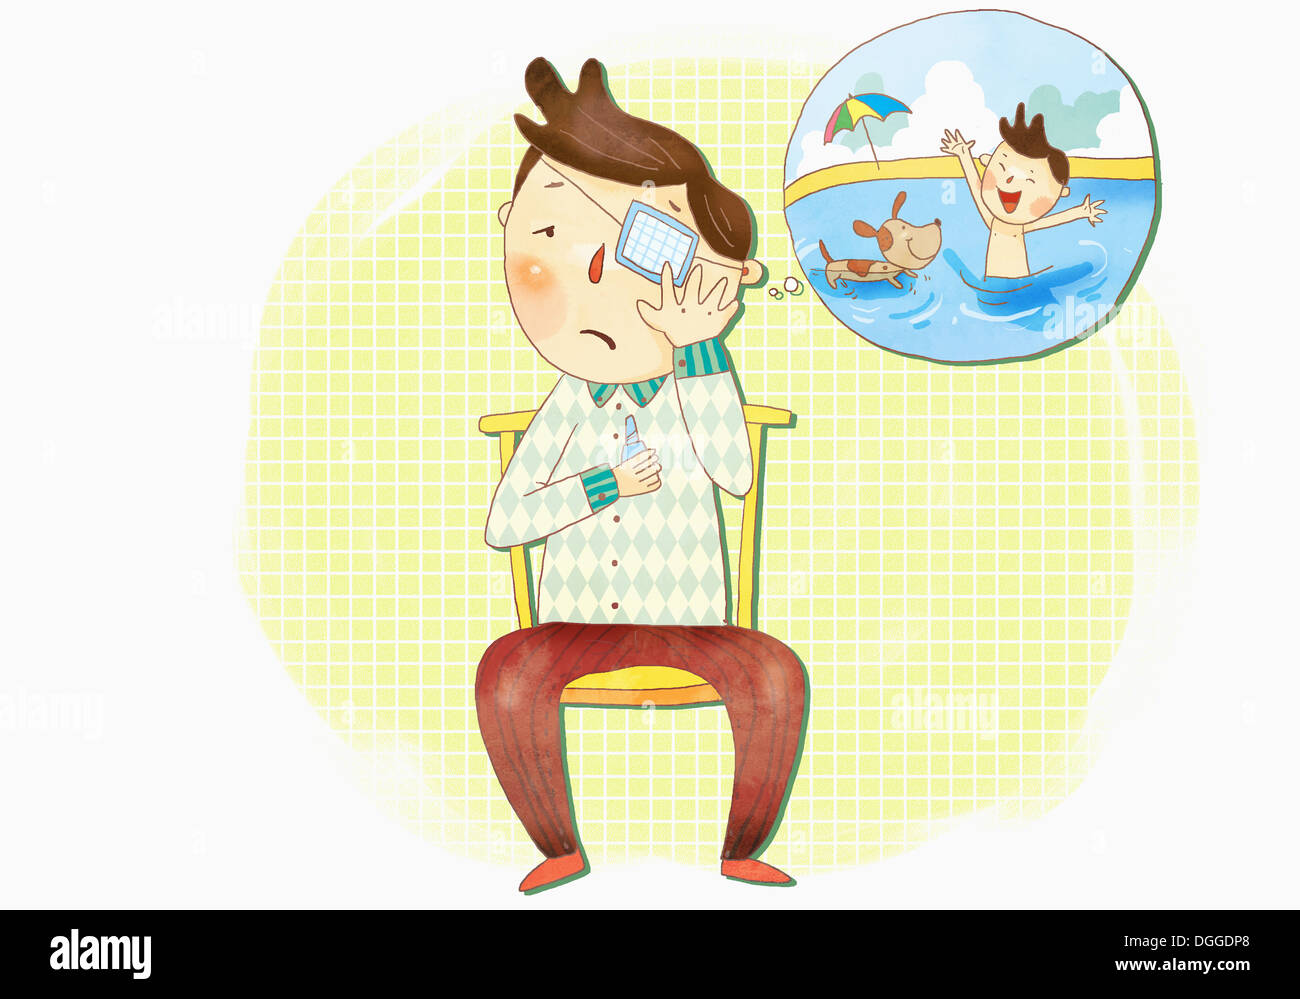 an illustration of a boy with a eye injury Stock Photo